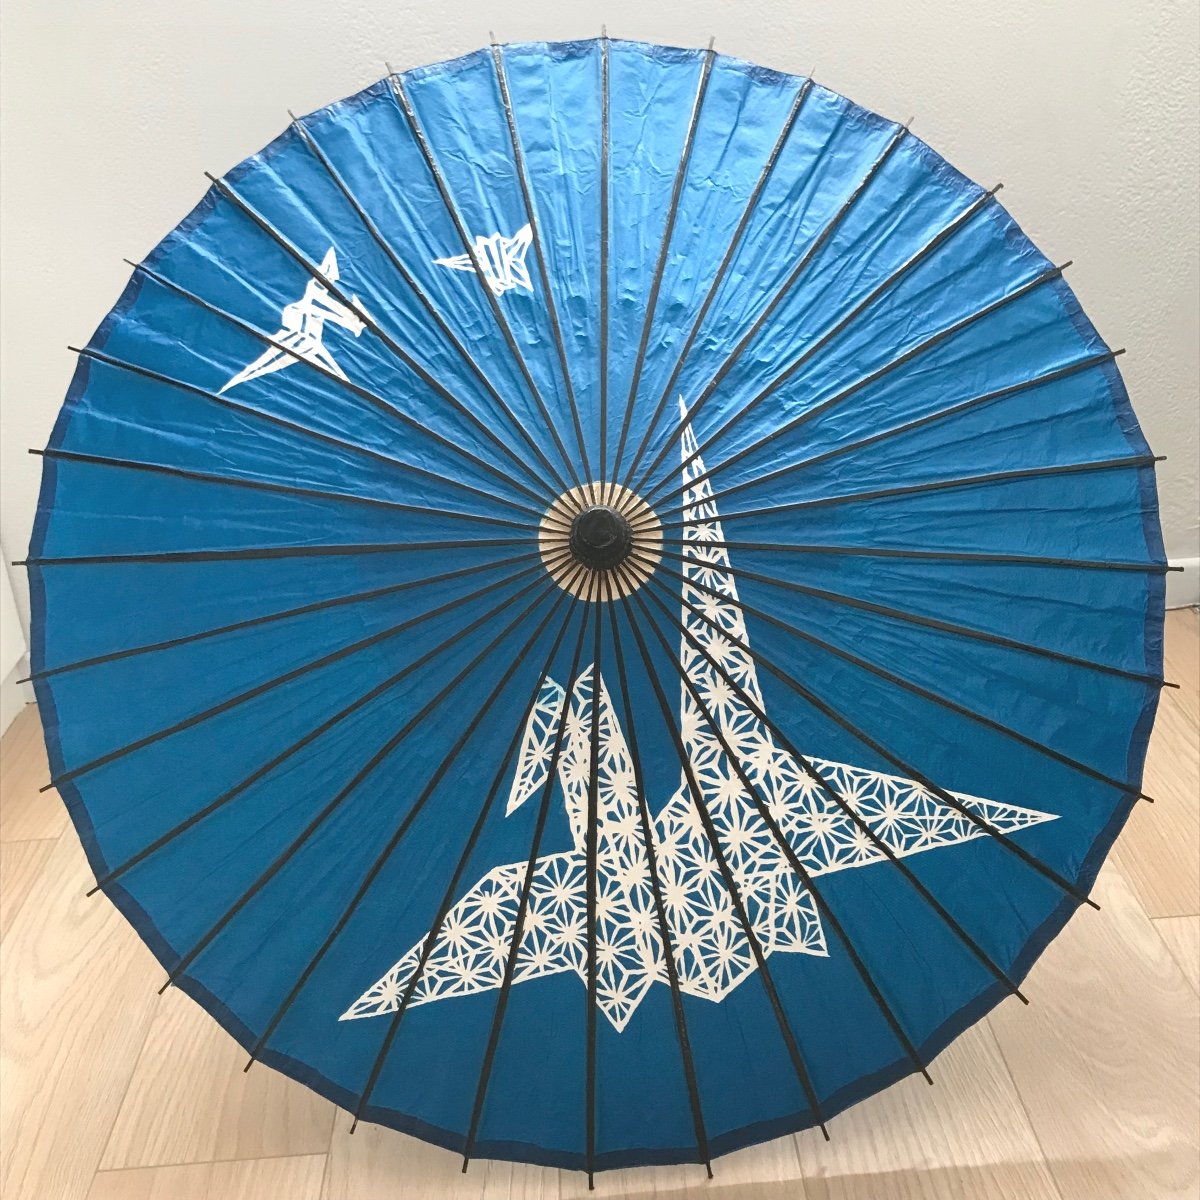 Japanese Umbrella In Blue Washi Paper And Origami - Japan